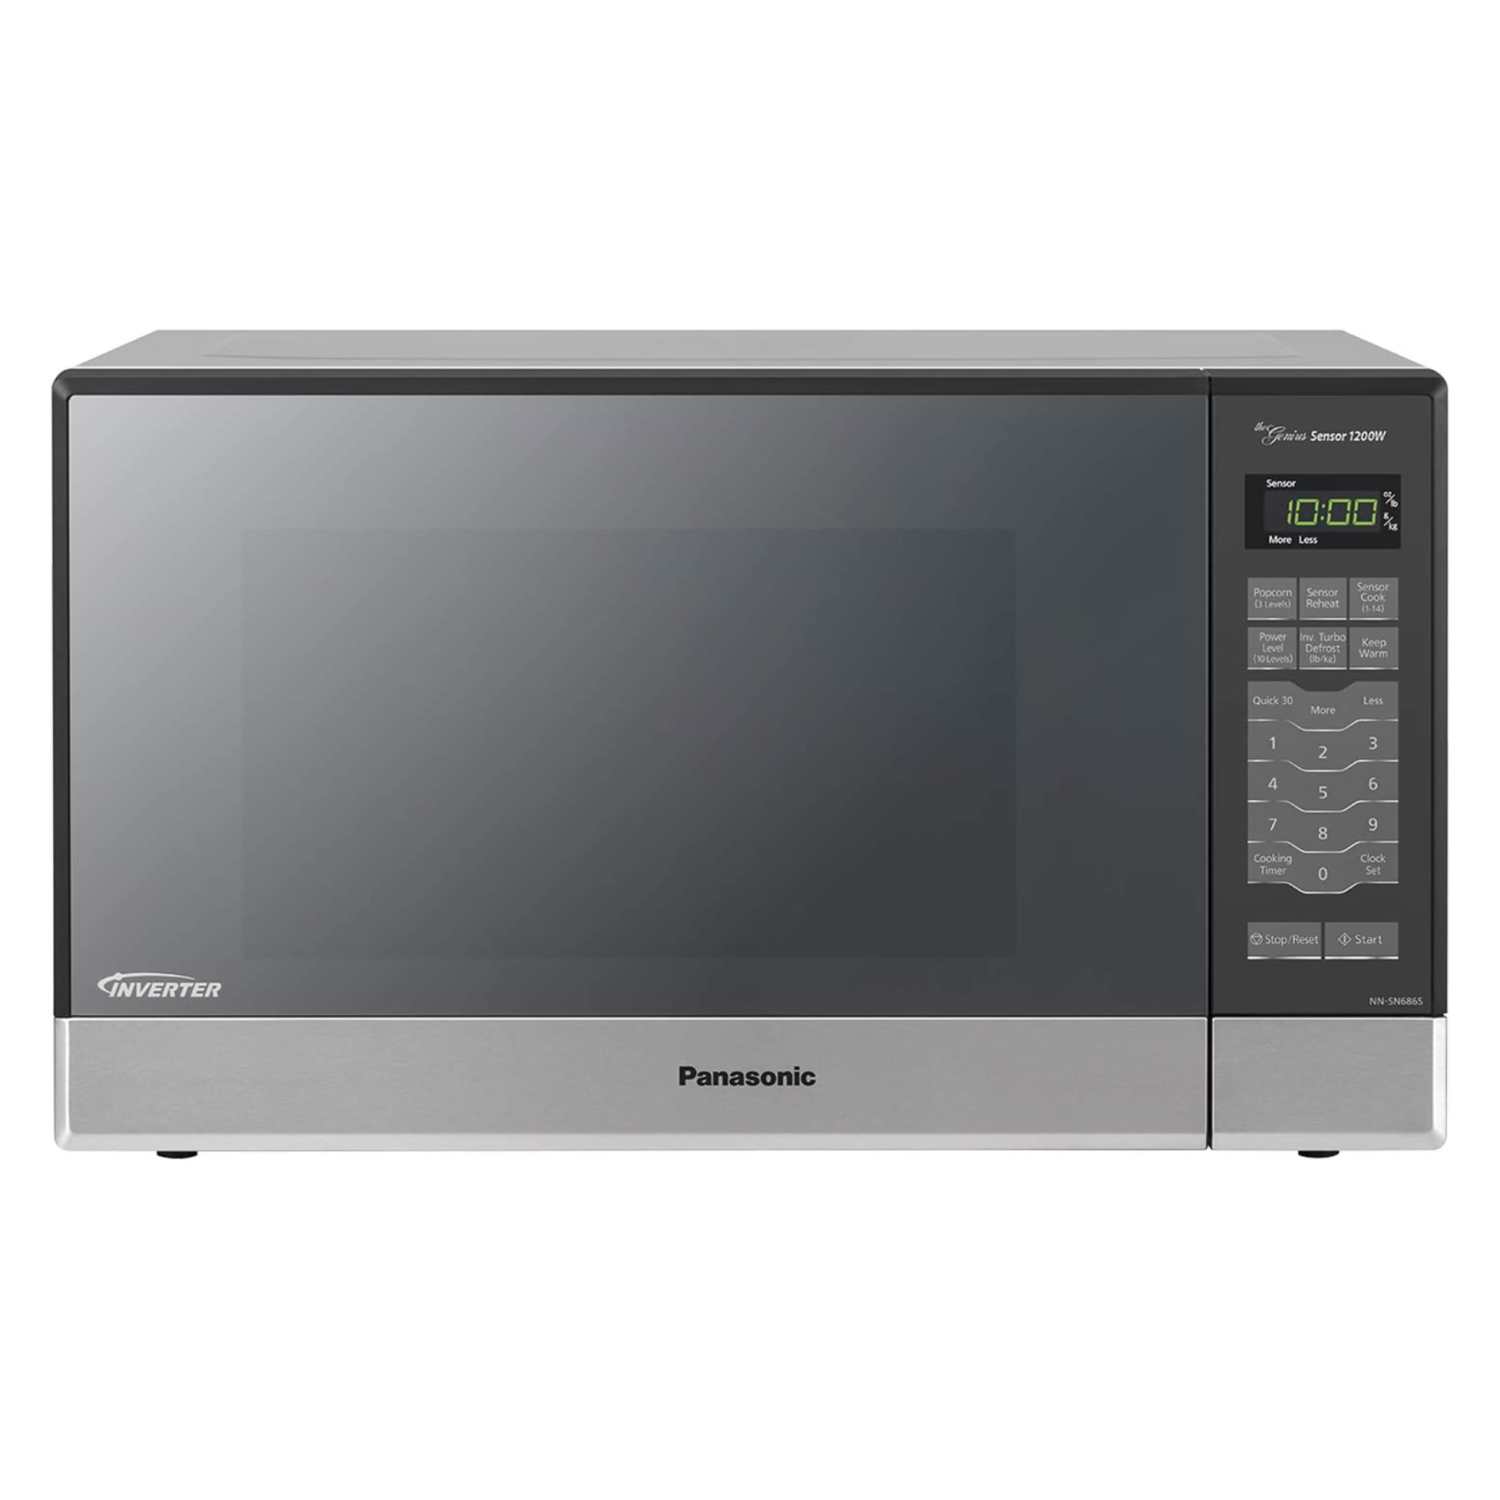 Panasonic 1.2 cu ft Microwave Oven Countertop/Built-in with Inverter Technology and Genius Sensor, 1200W - Stainless Steel (NN-SN686S)